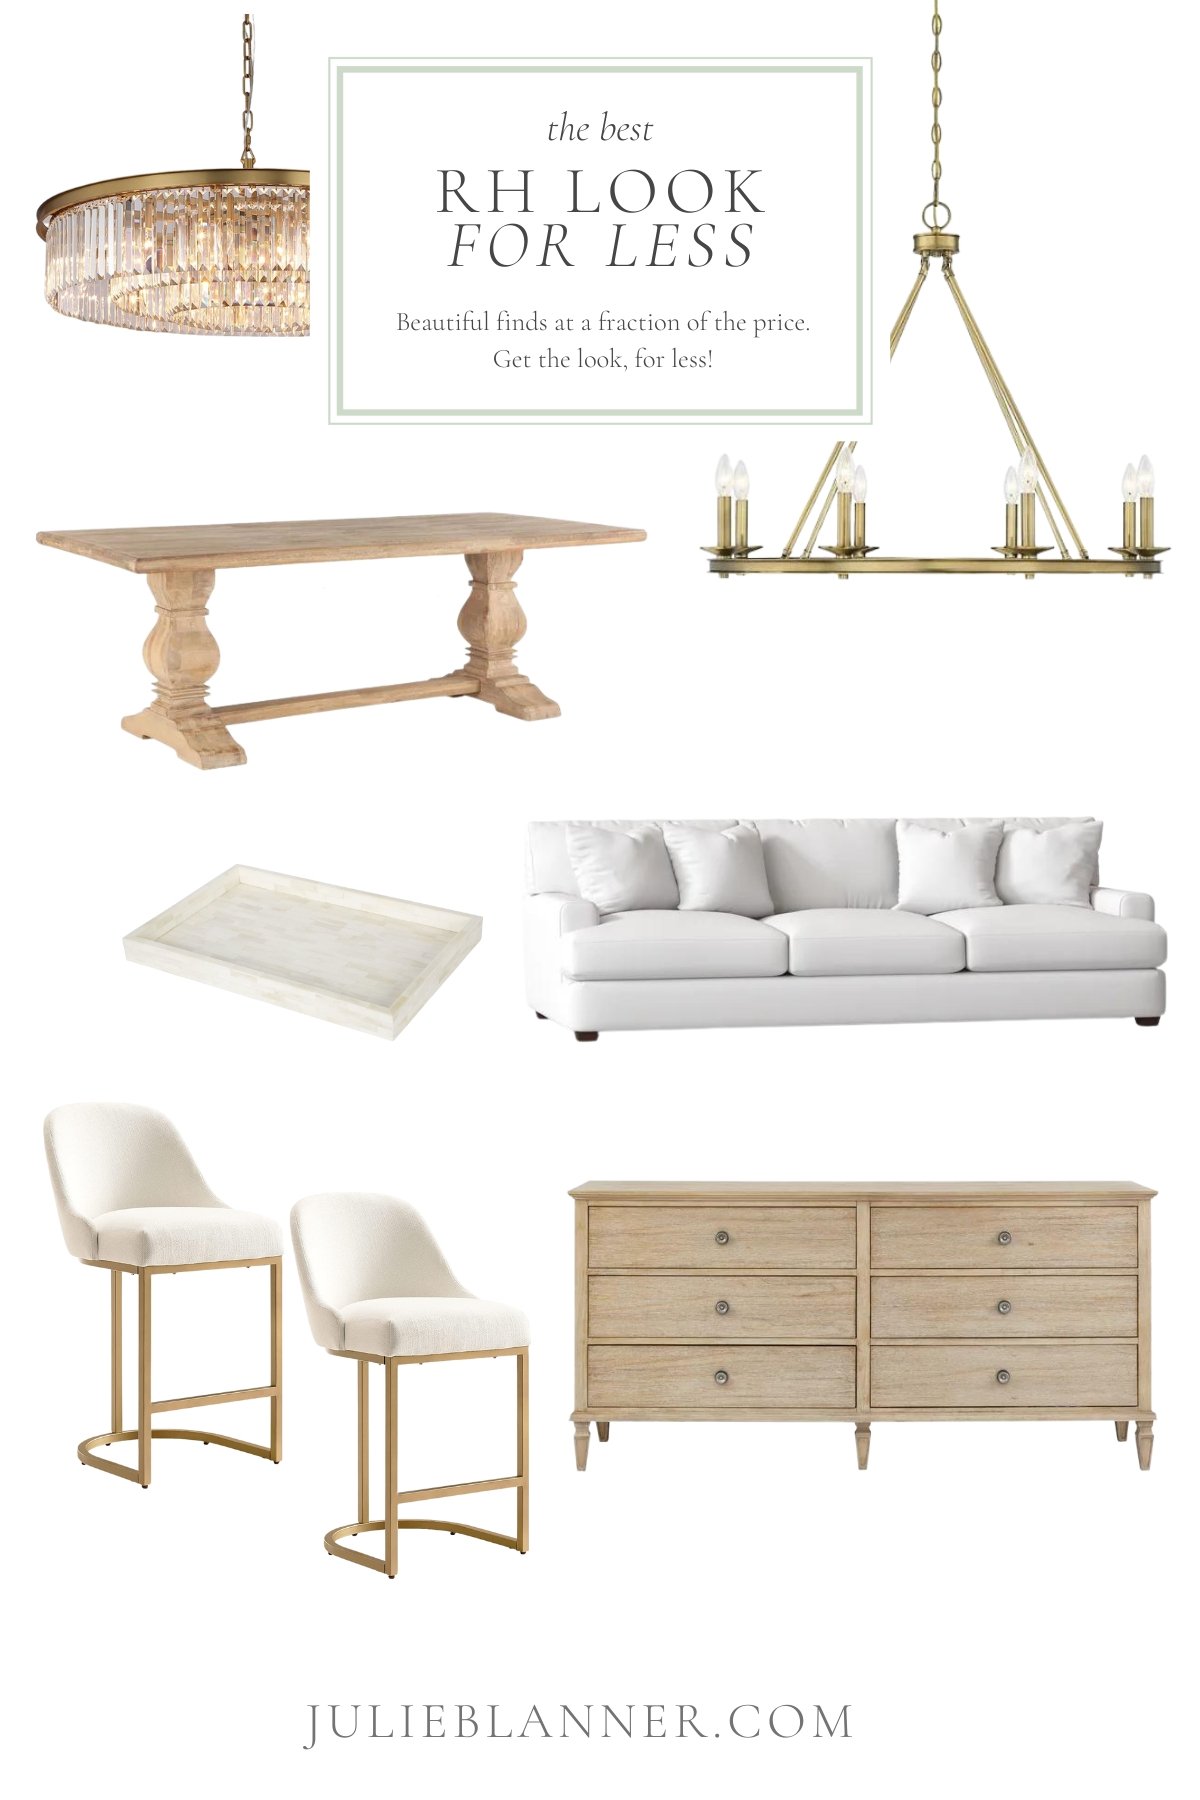 A graphic for a shopping guide on getting the RH look for less, featuring lots of items in the Restoration Hardware style. 